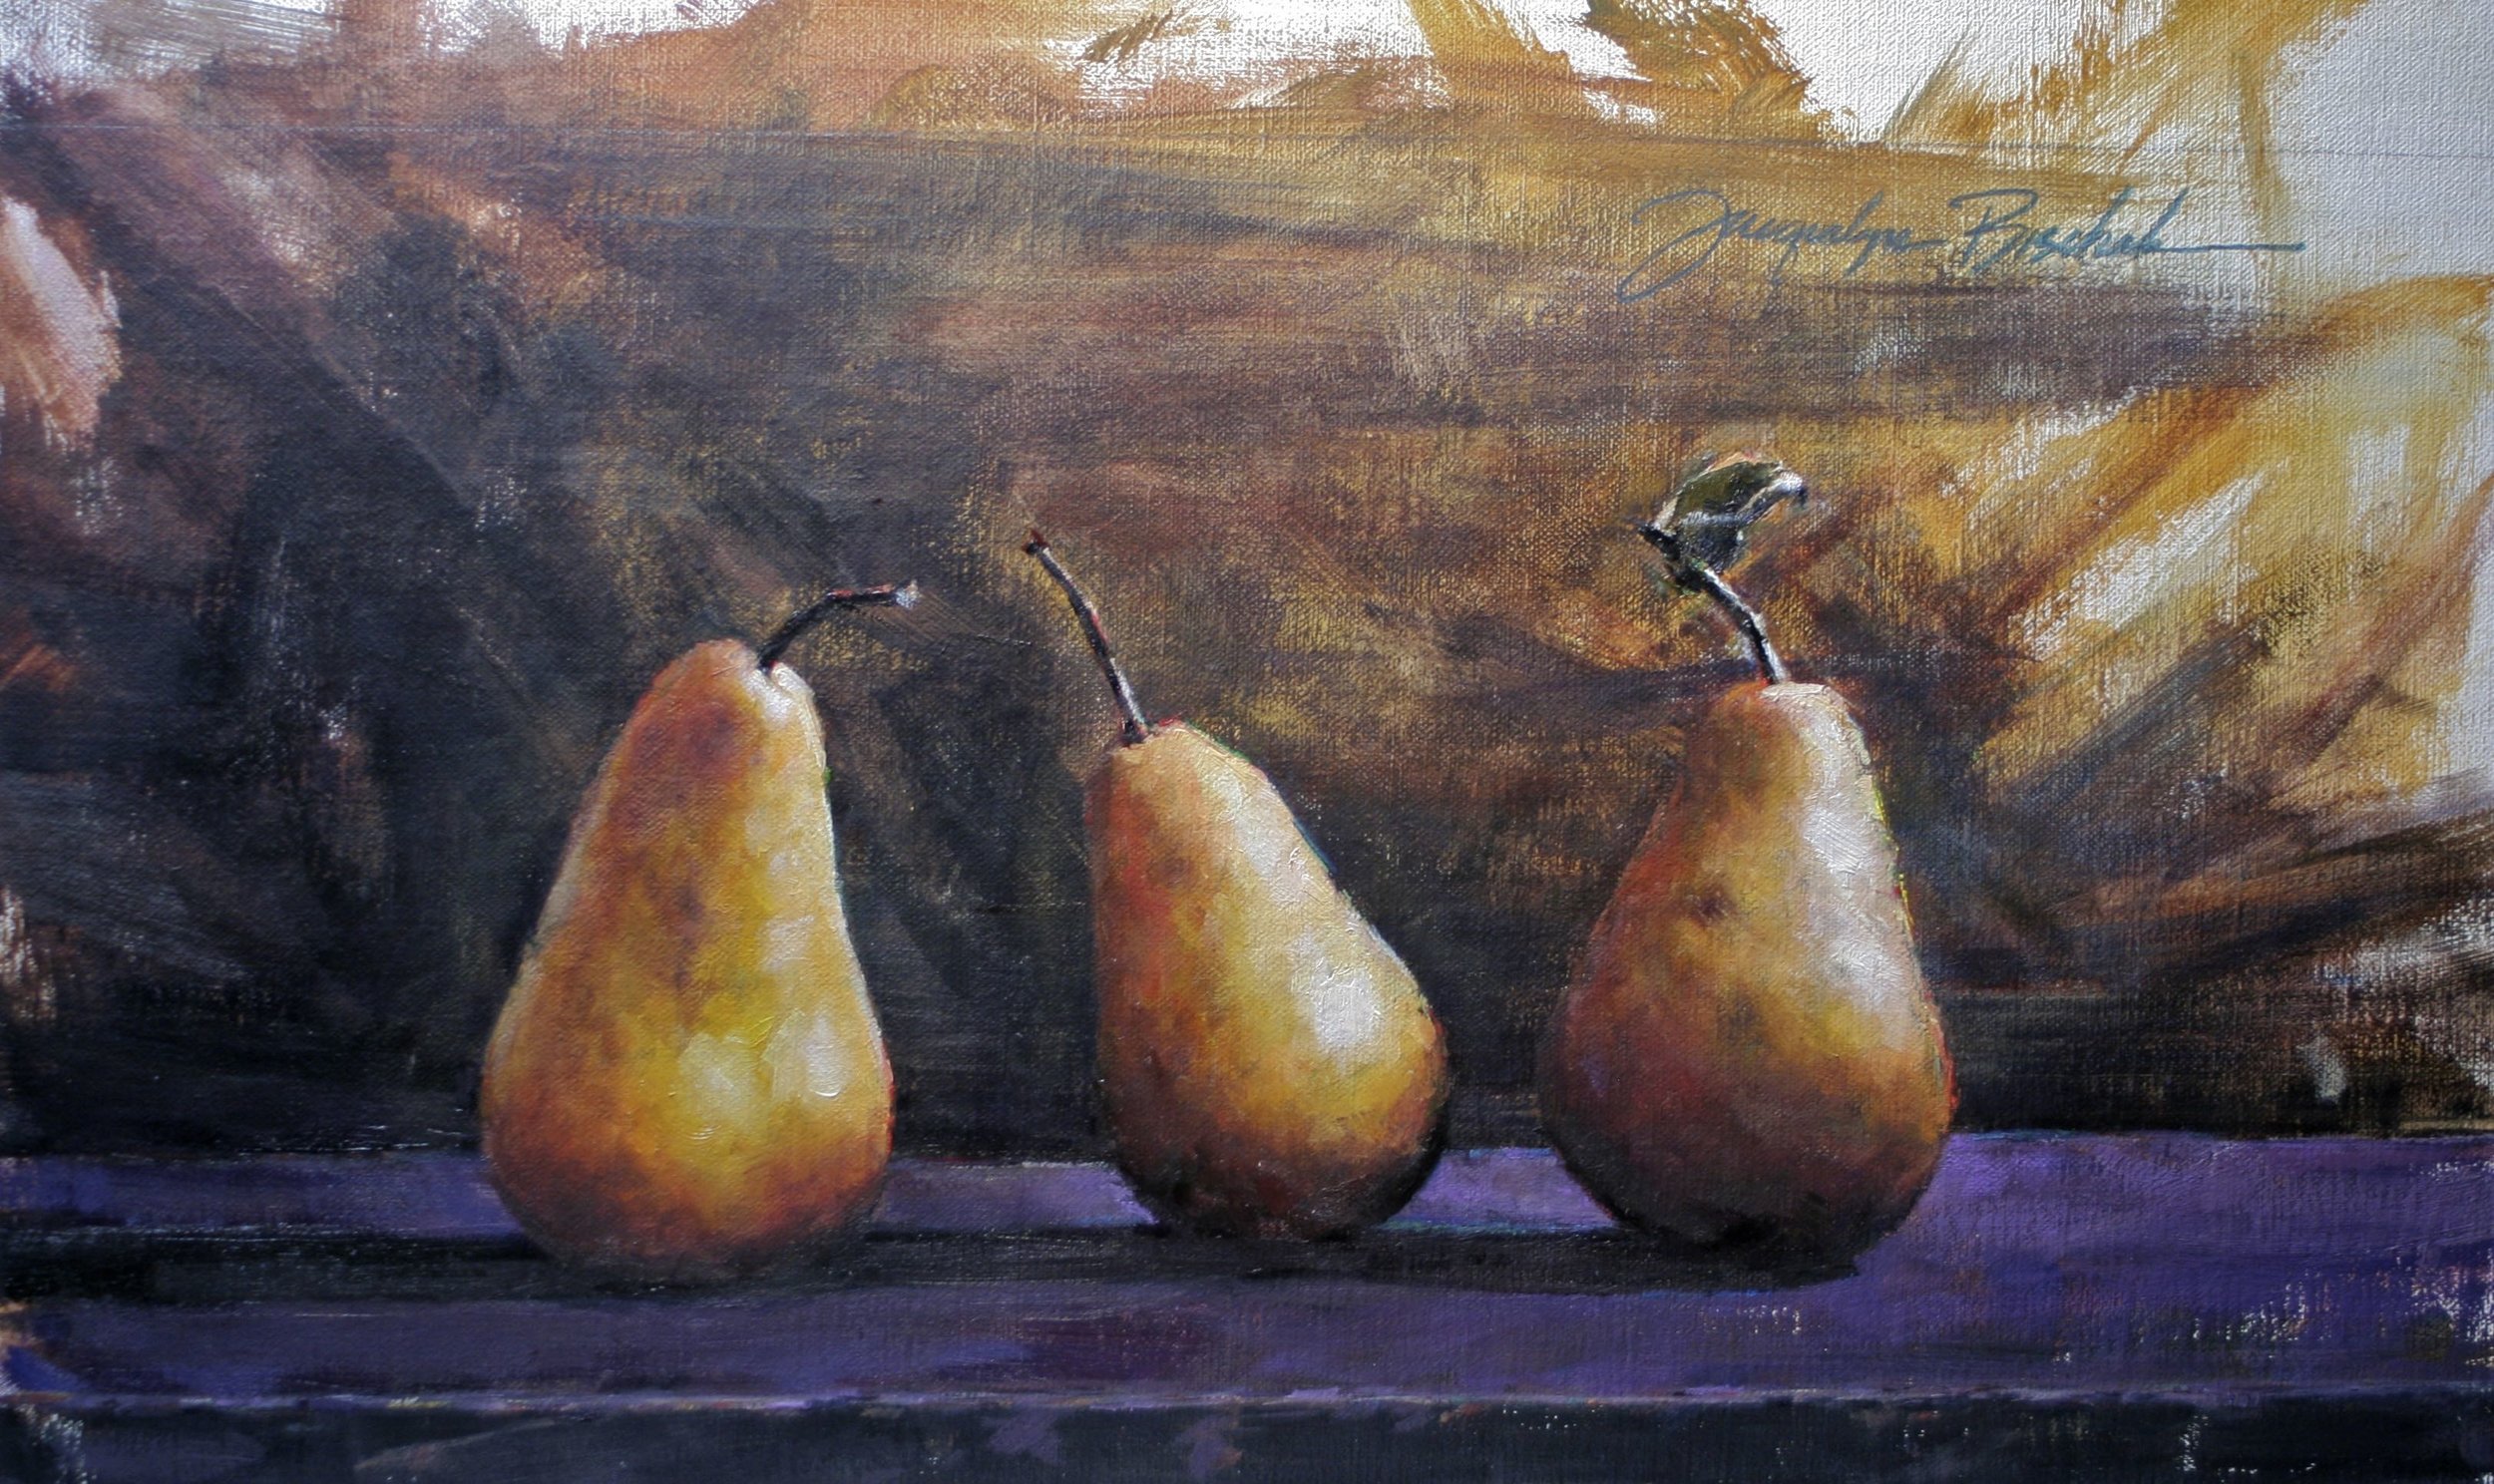 "Two Of Three In A Pear"  12x10